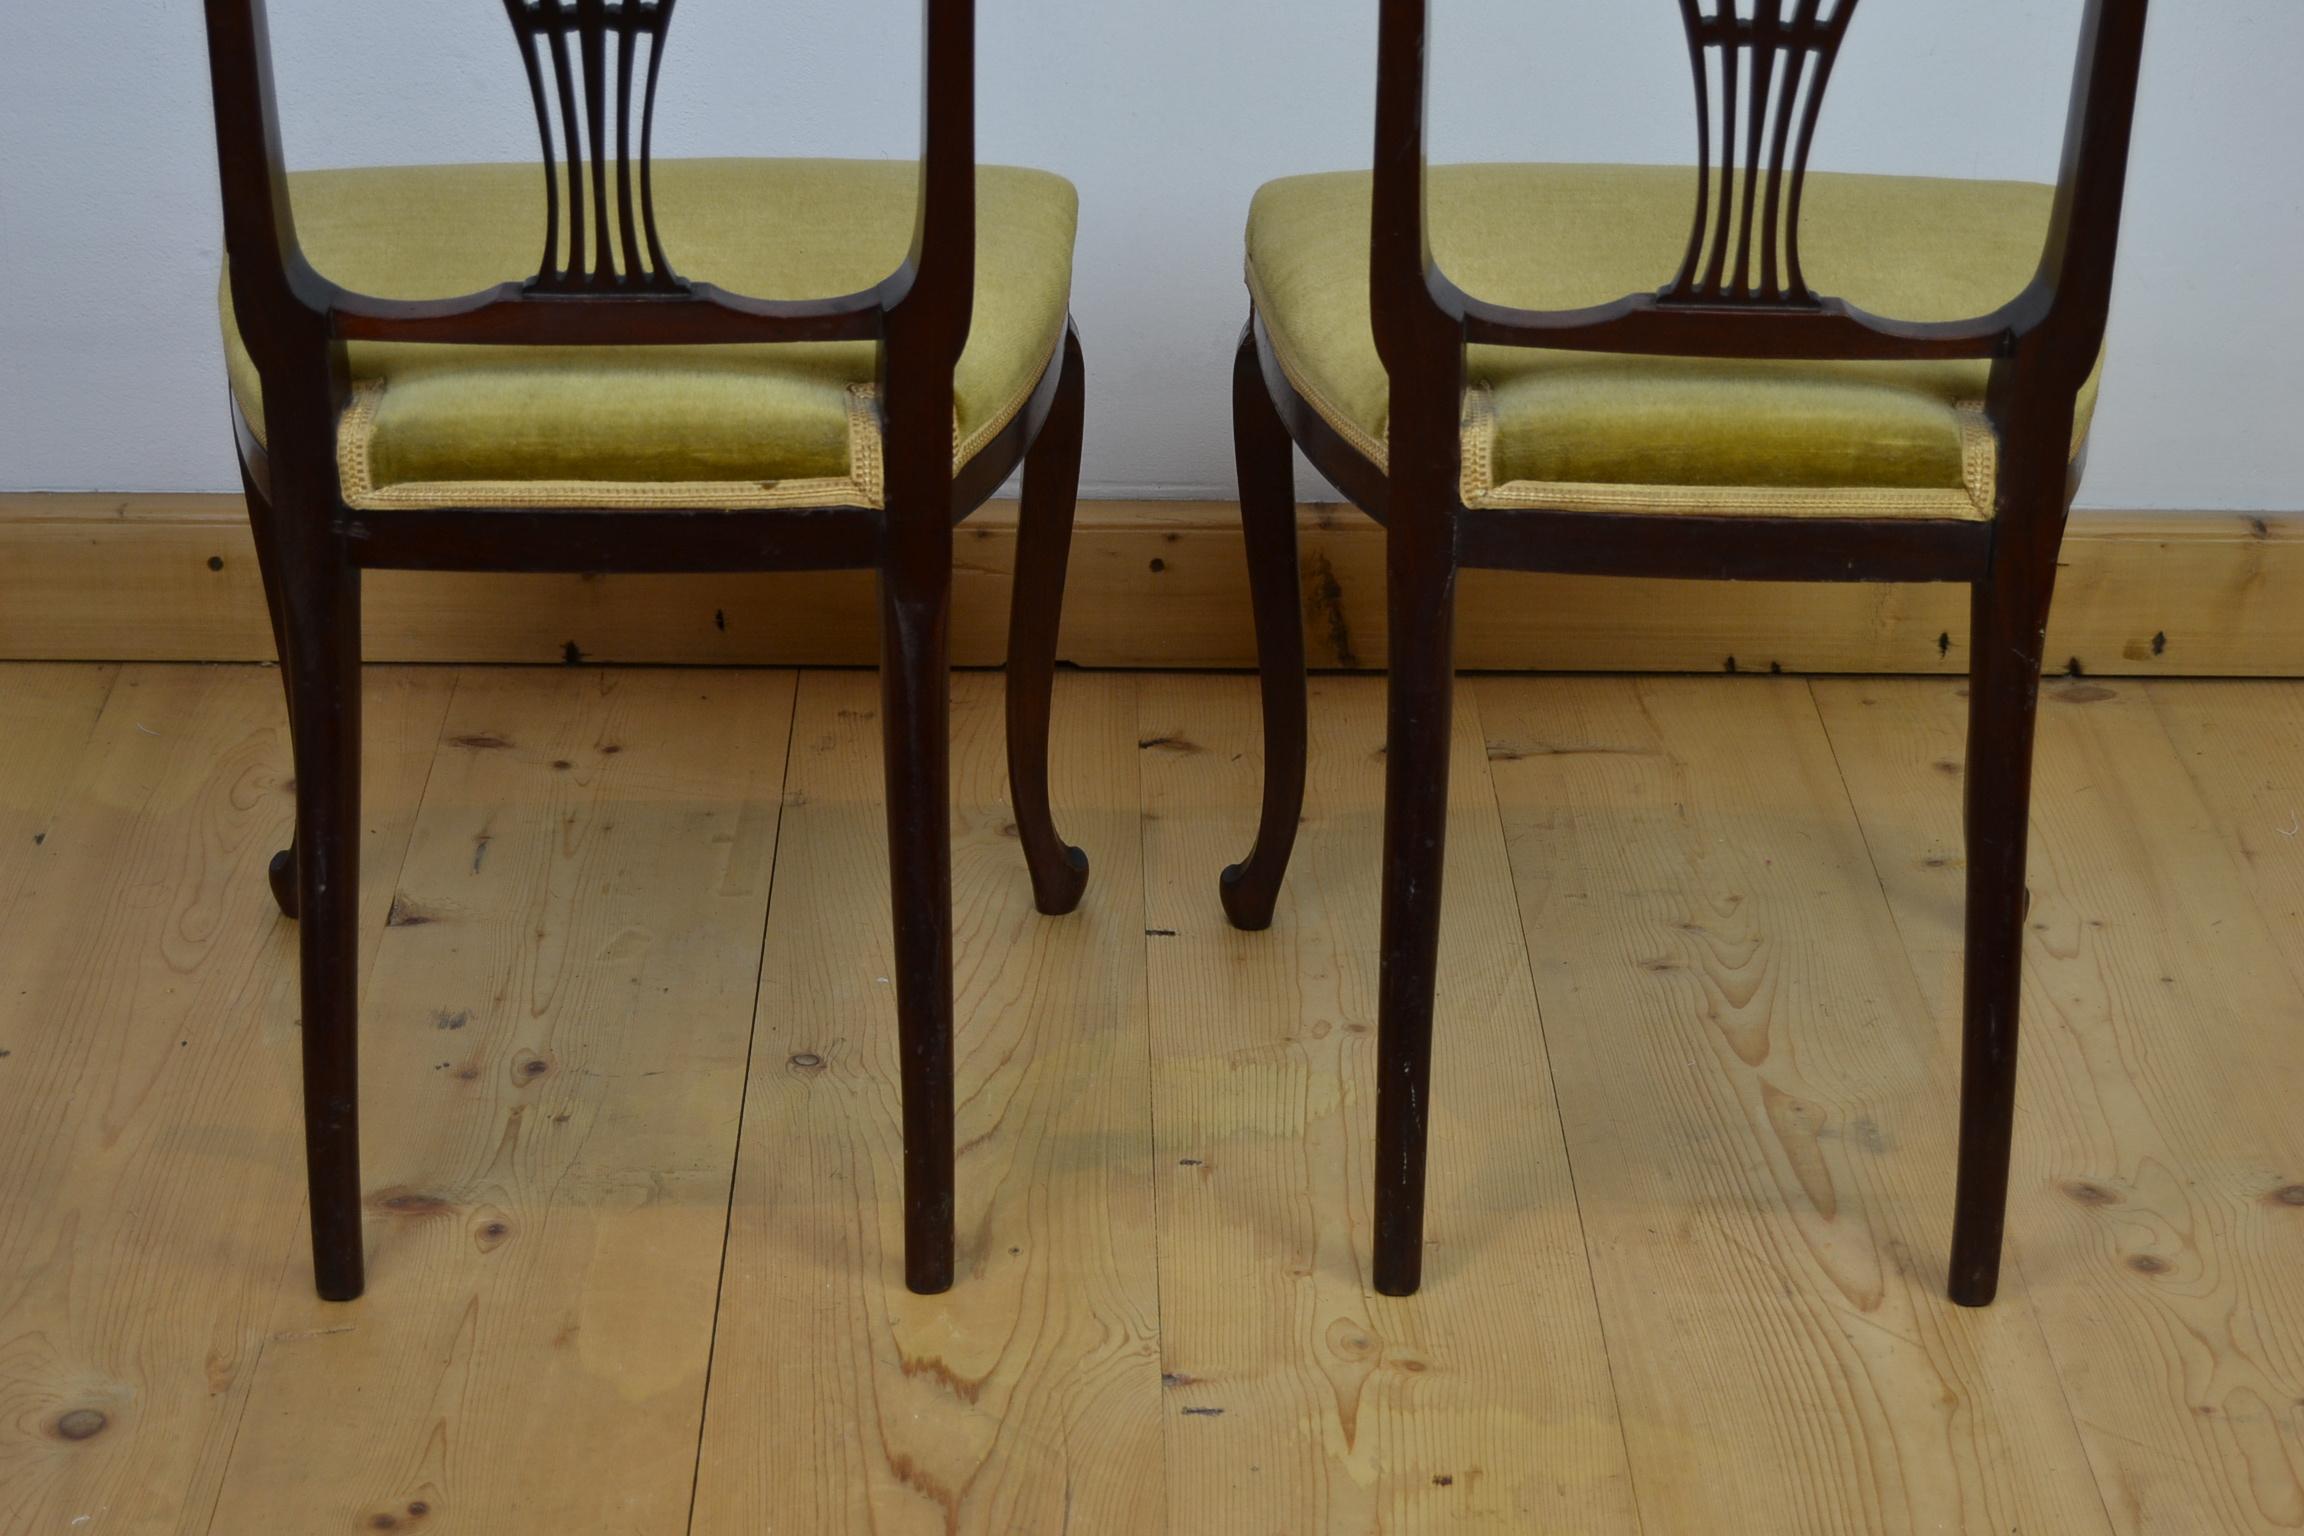 Hollandia Pander & Zn Pair of Side Chairs, Late 19th Century For Sale 9